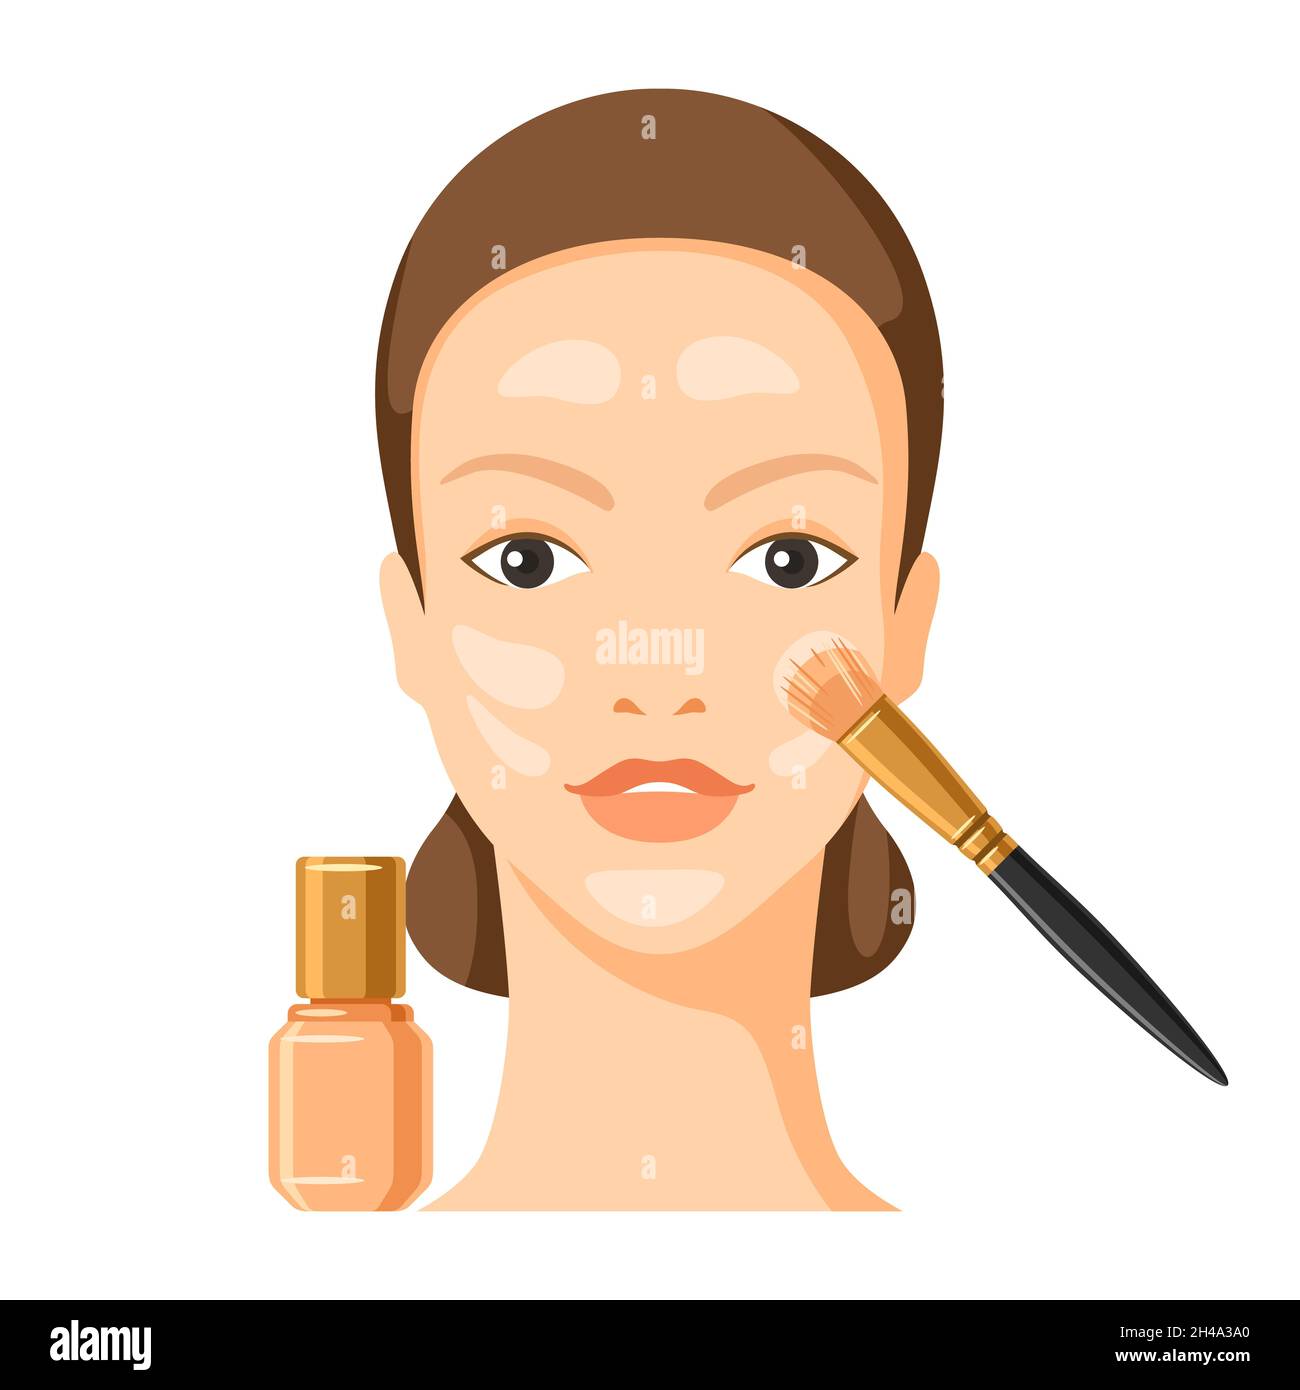 Process of applying primer to face. Illustration of beautiful woman with make up. Stock Vector